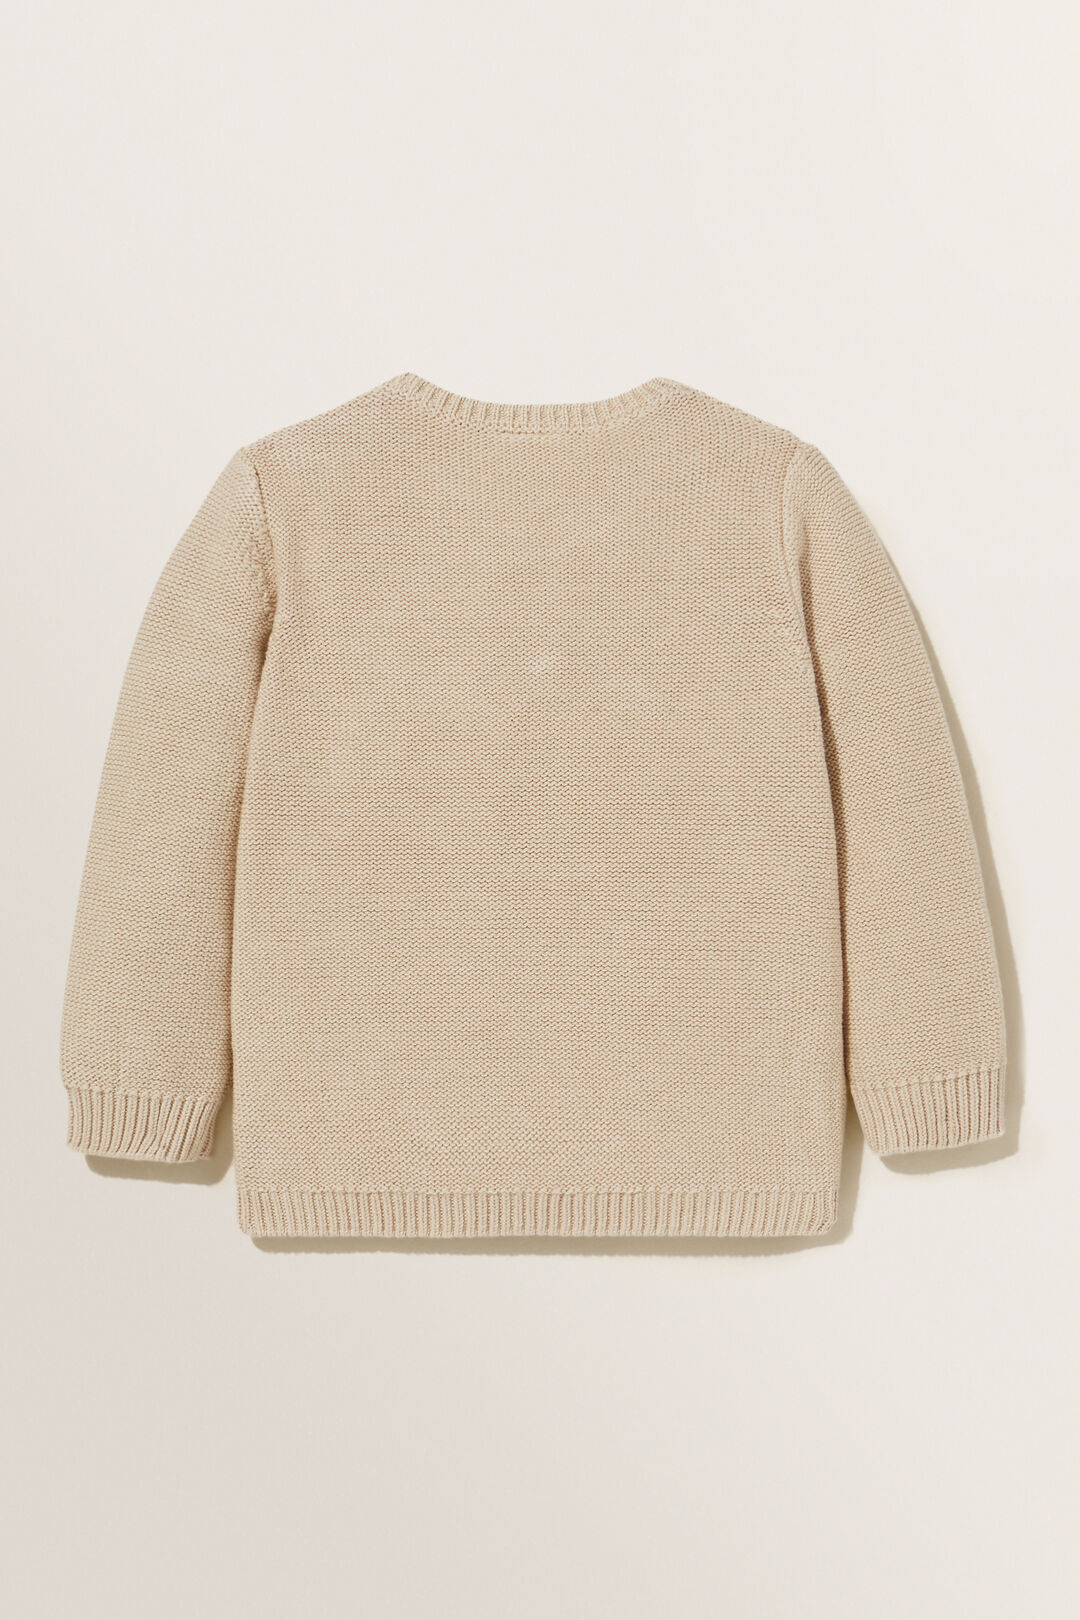 Buttercup Knit Sweater  Chai  hi-res